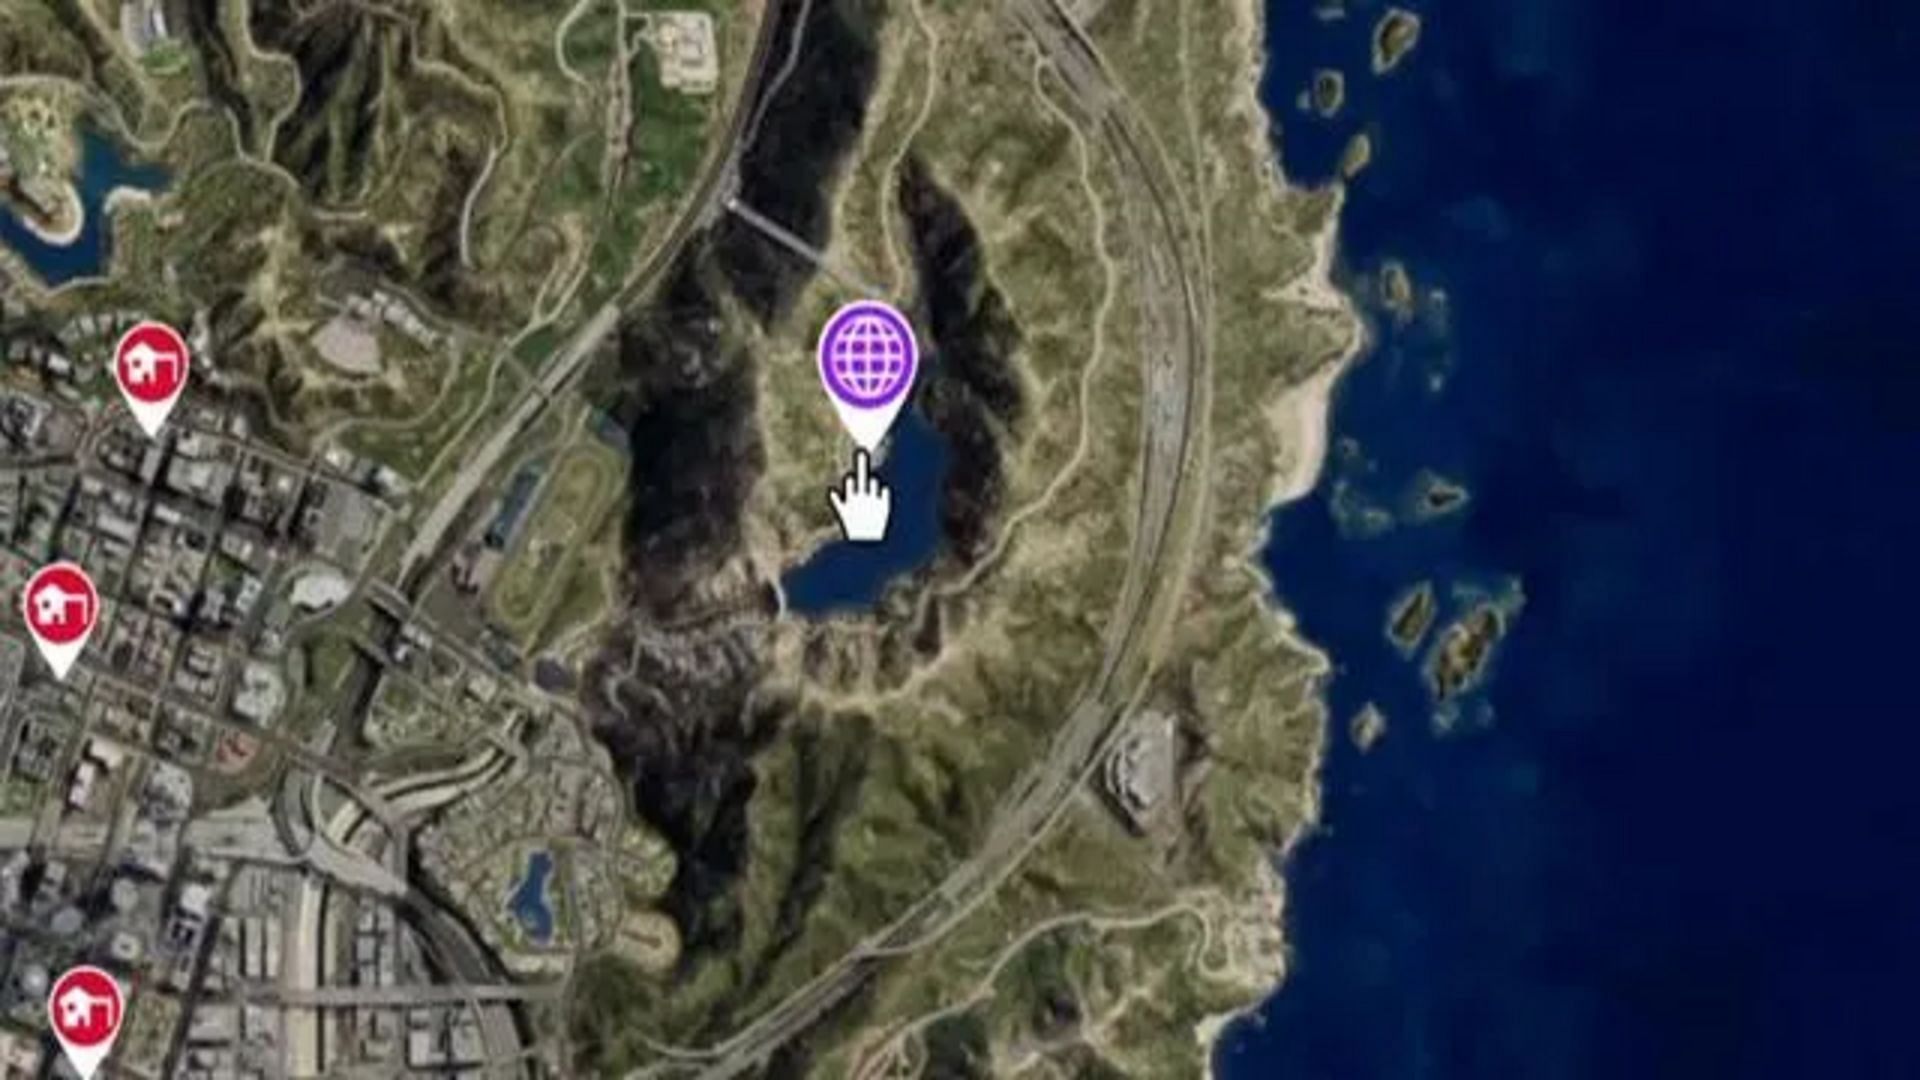 Location of the Land Act Reservoir Facility on the map (Image via GTA Base)